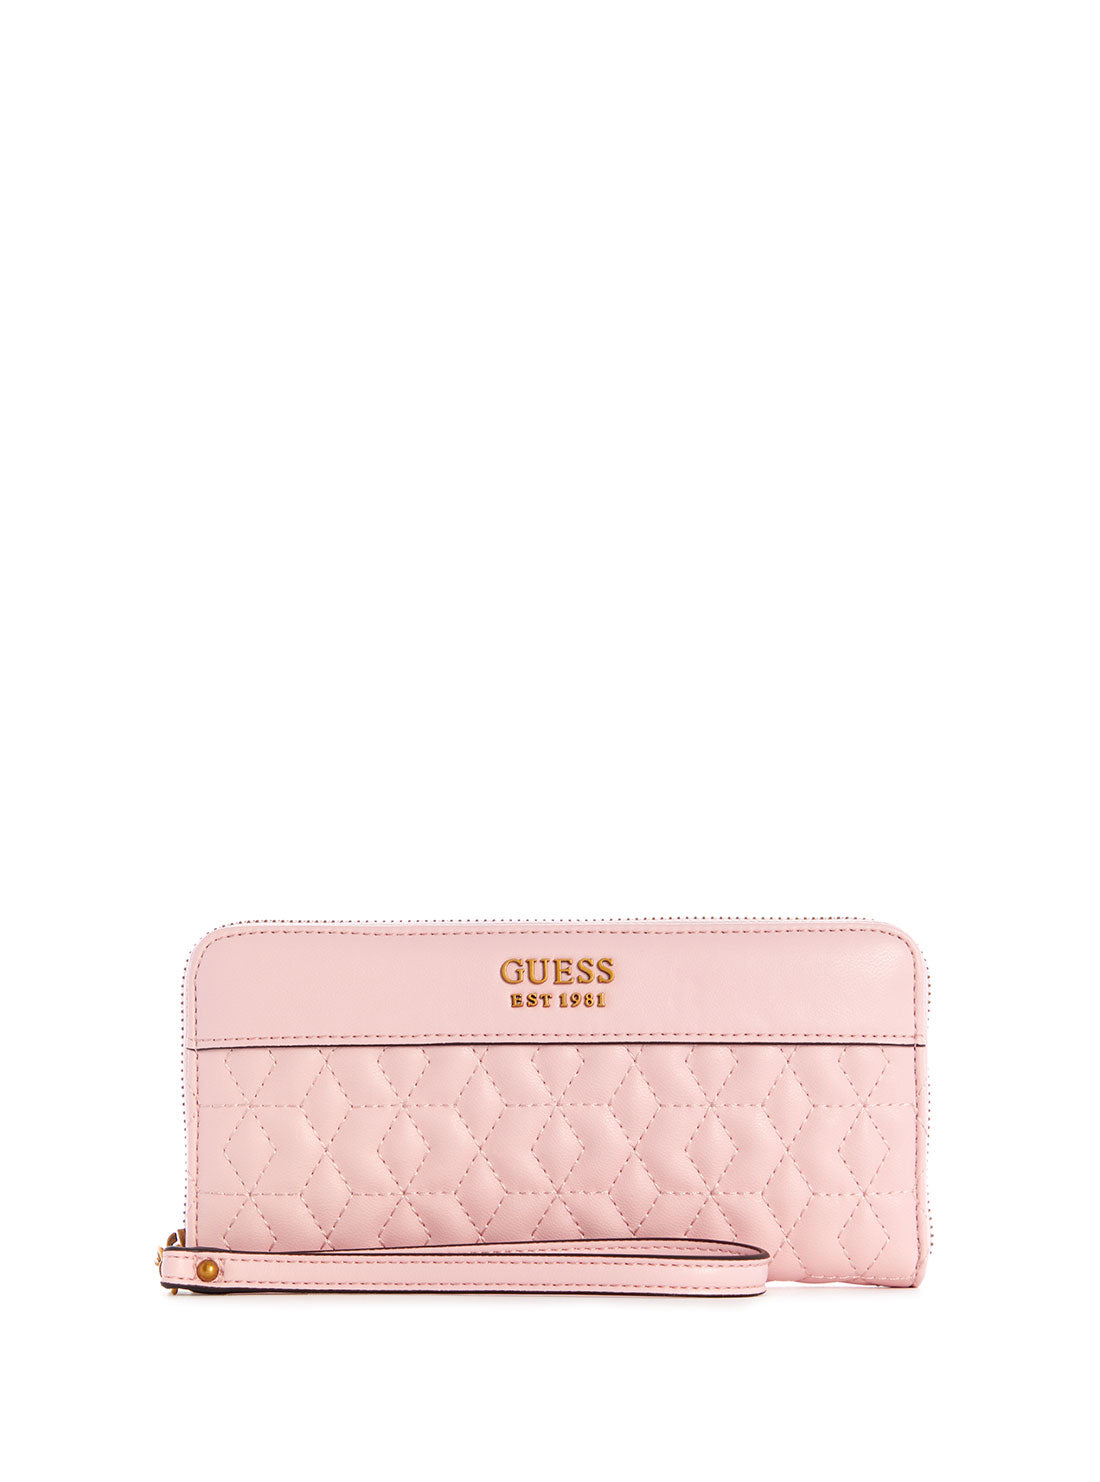 GUESS Women's Pink Katey Large Wallet DB787046 Front View